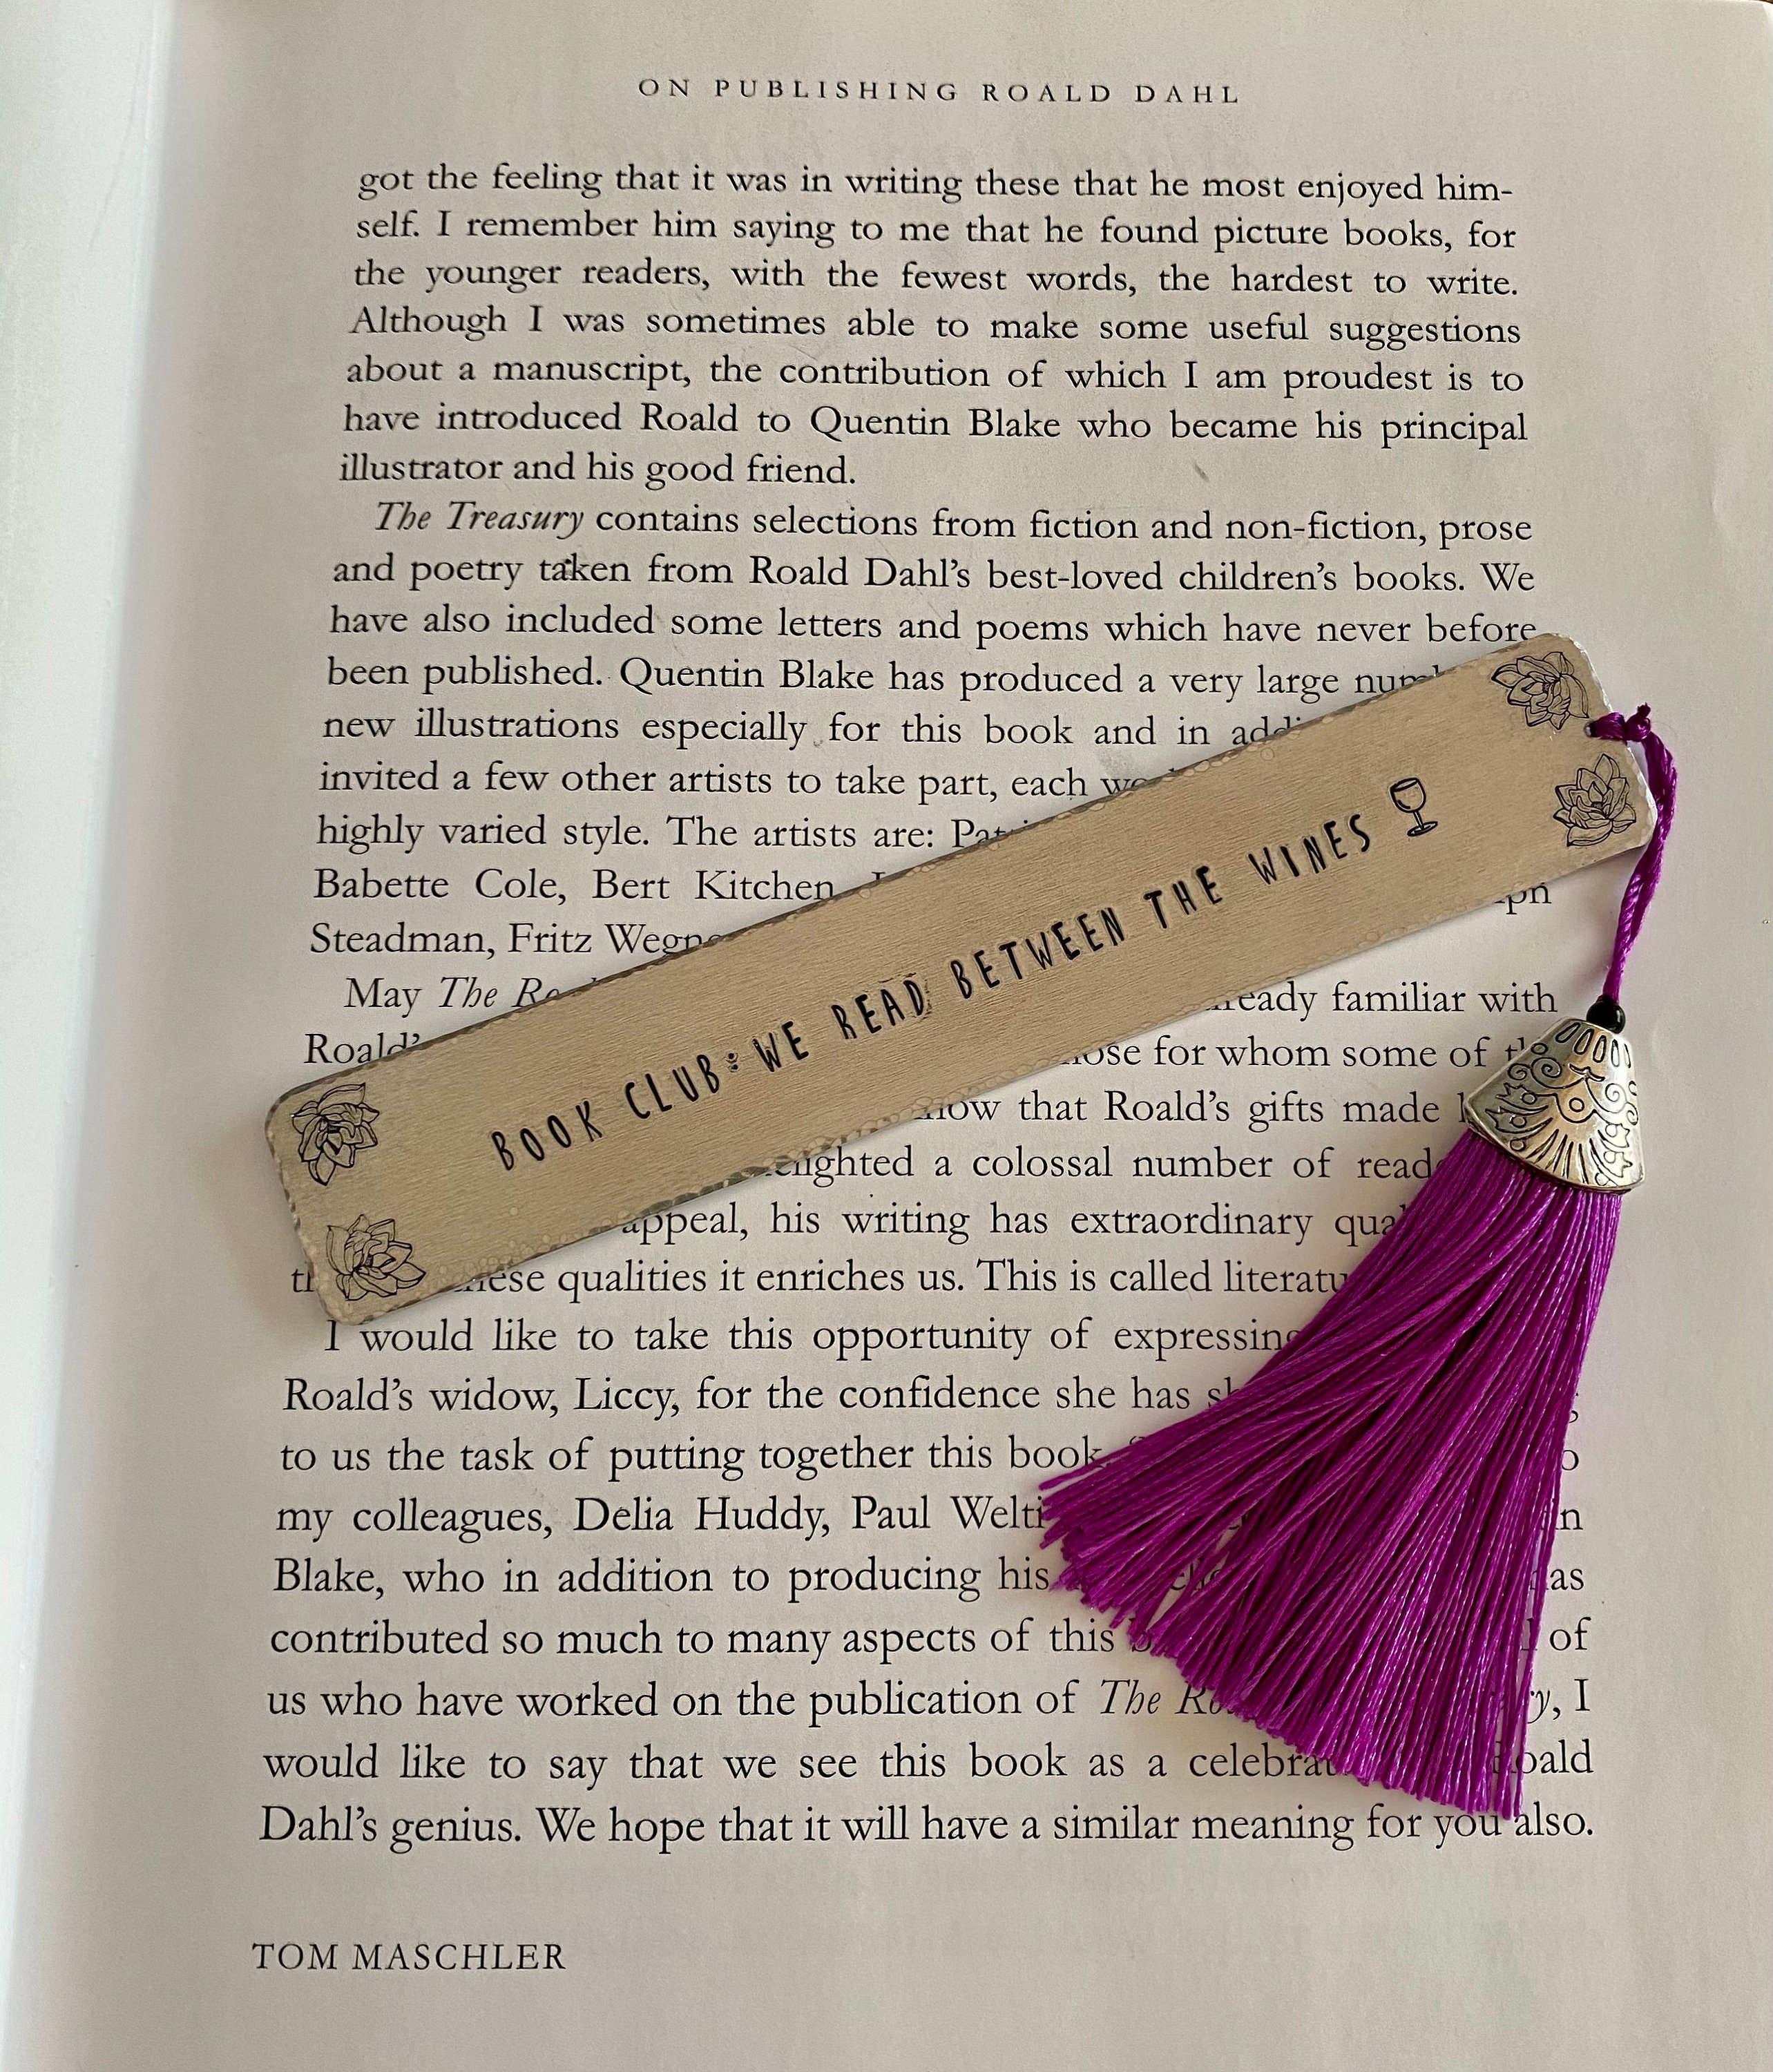 Book Club Bookmarks, Personalized Metal Bookmarks for your book club